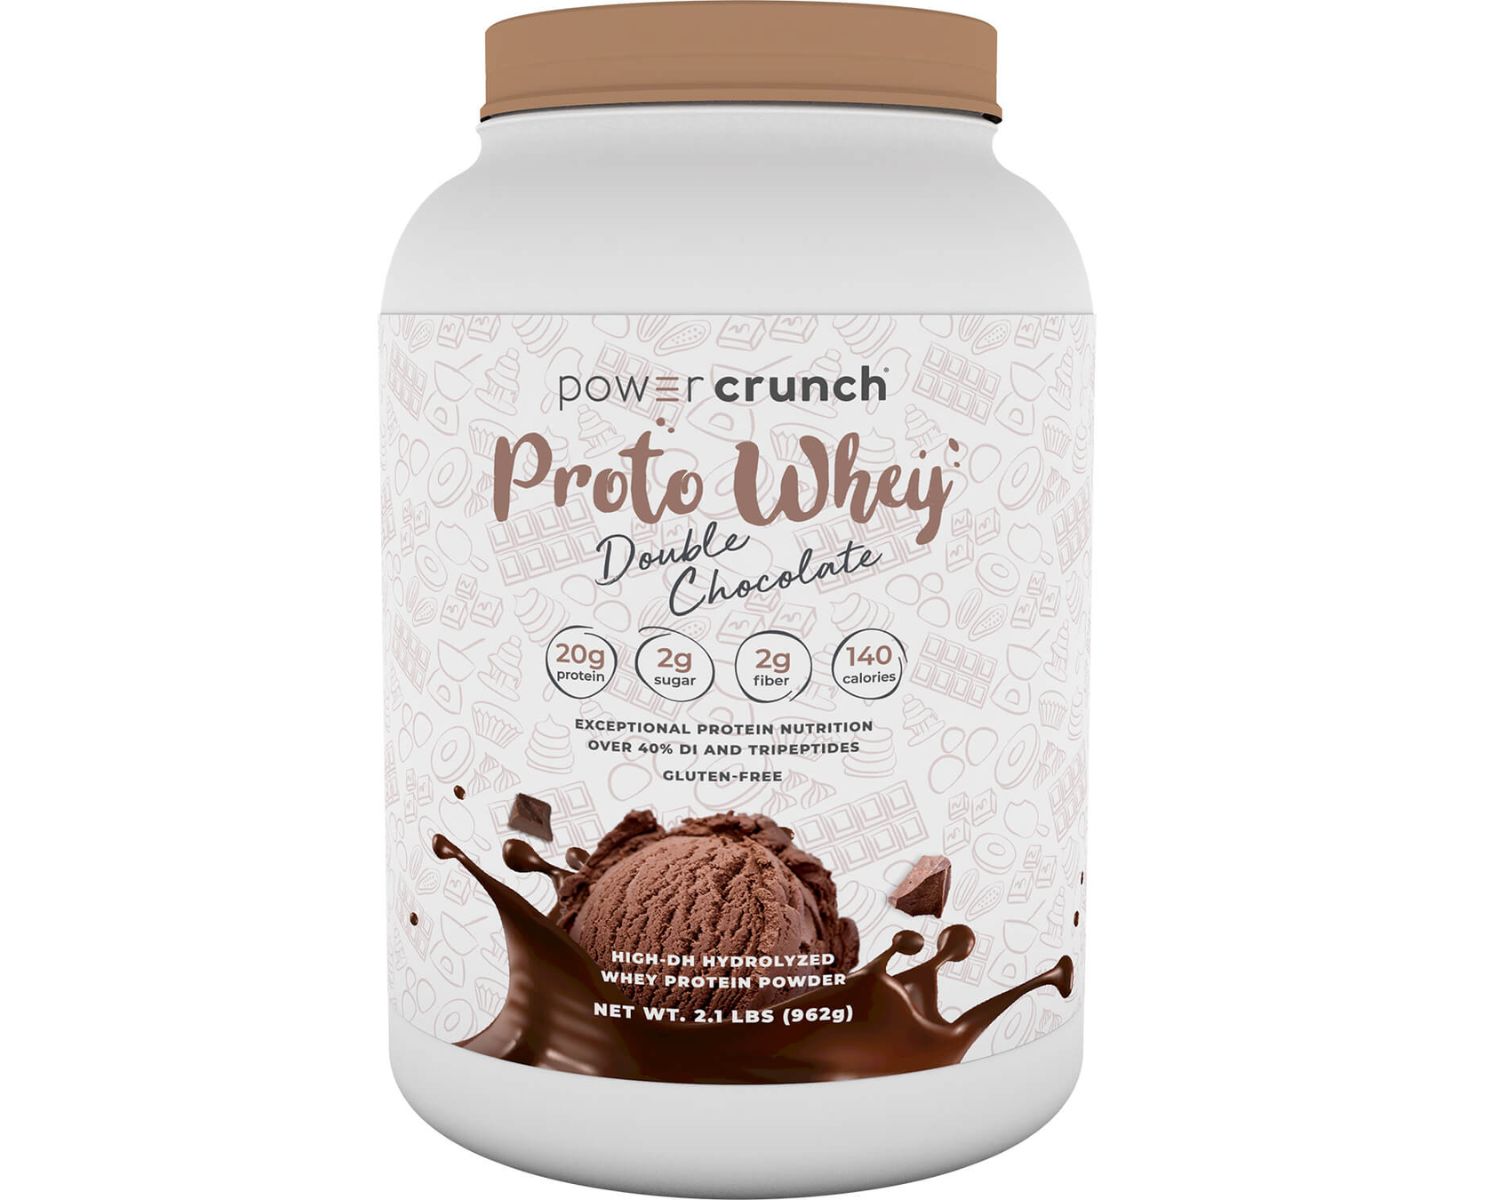 18-proto-whey-power-crunch-nutrition-facts